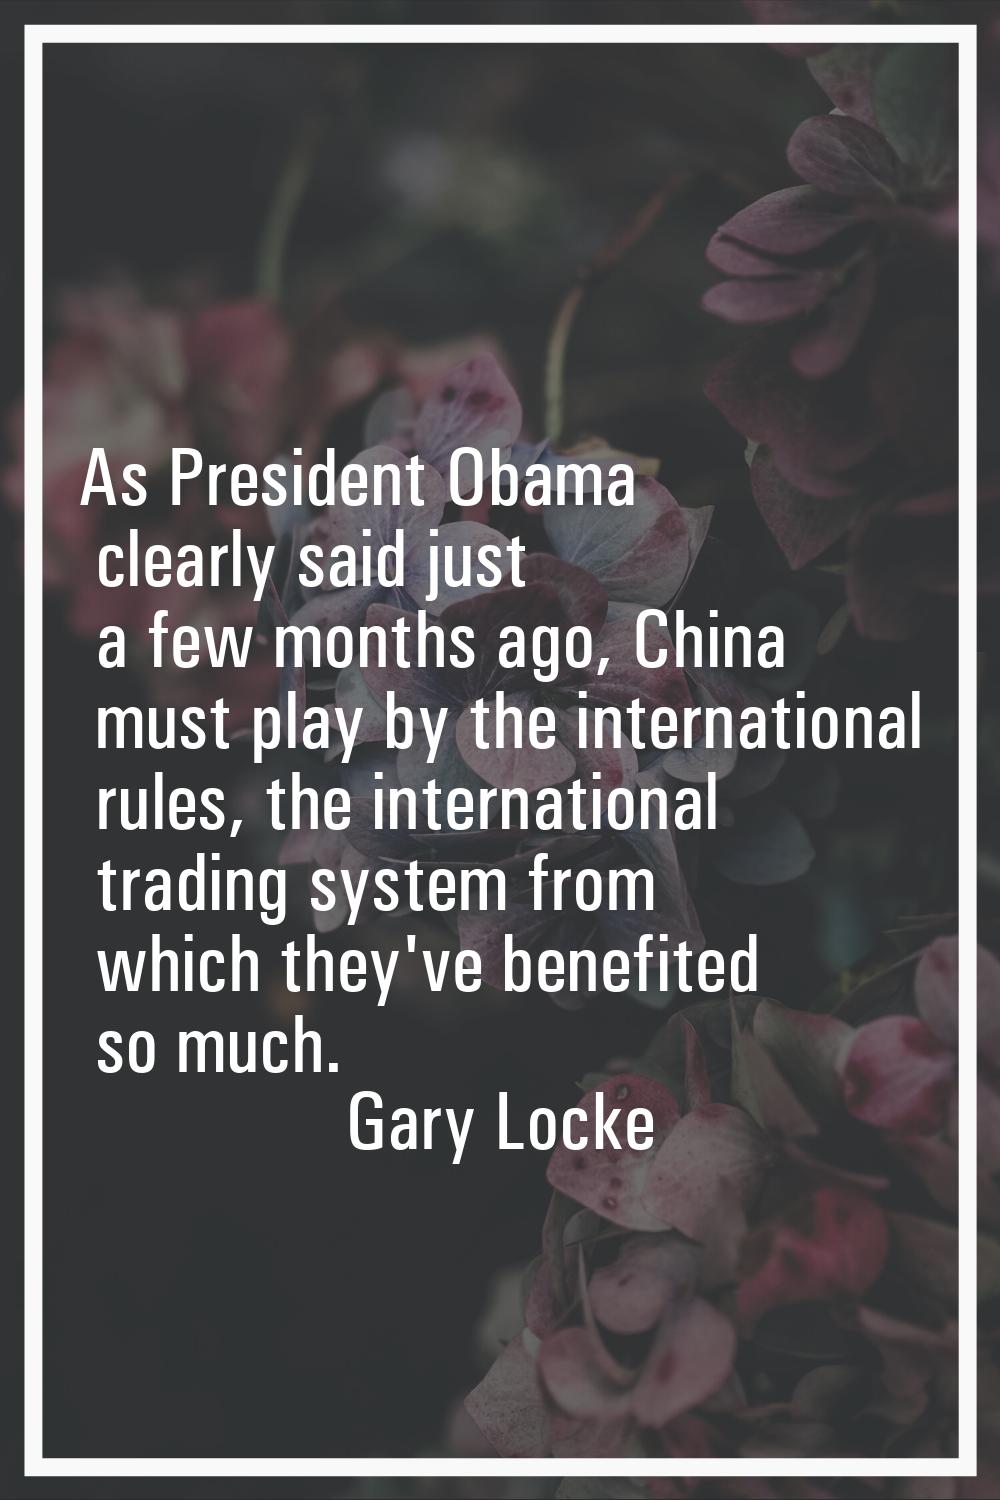 As President Obama clearly said just a few months ago, China must play by the international rules, 